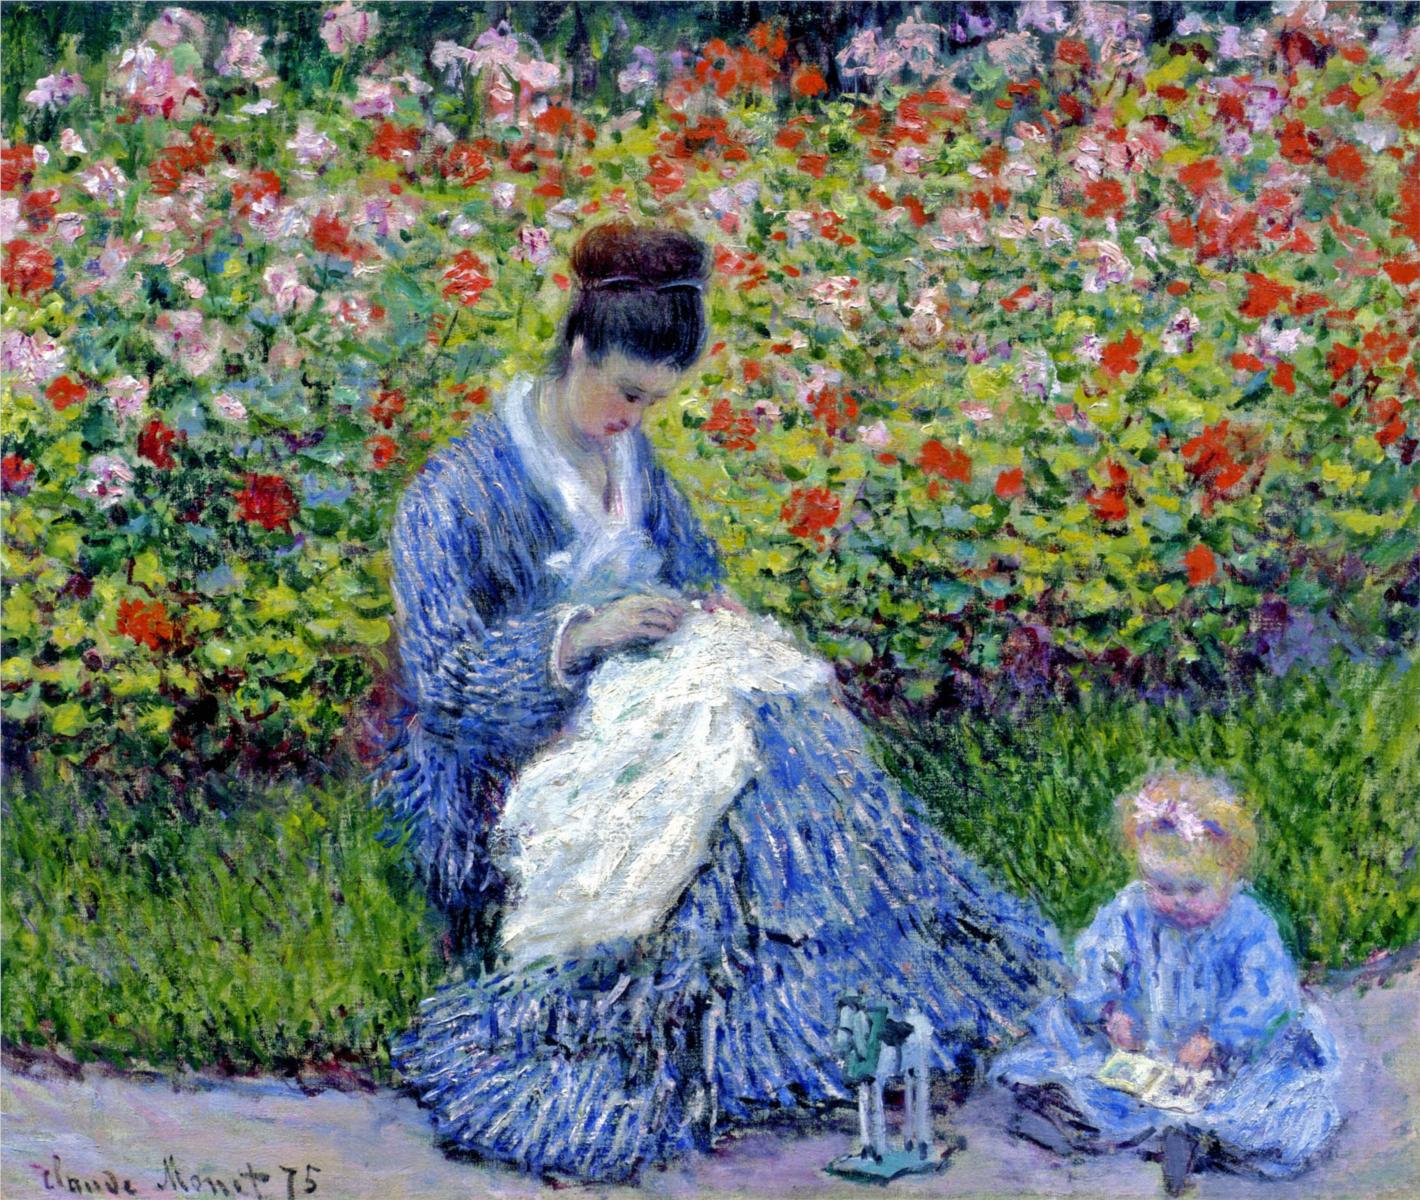  - Camille Monet and a Child in the Artist’s Garden in Argenteuil - مقهى جرير الثقافي